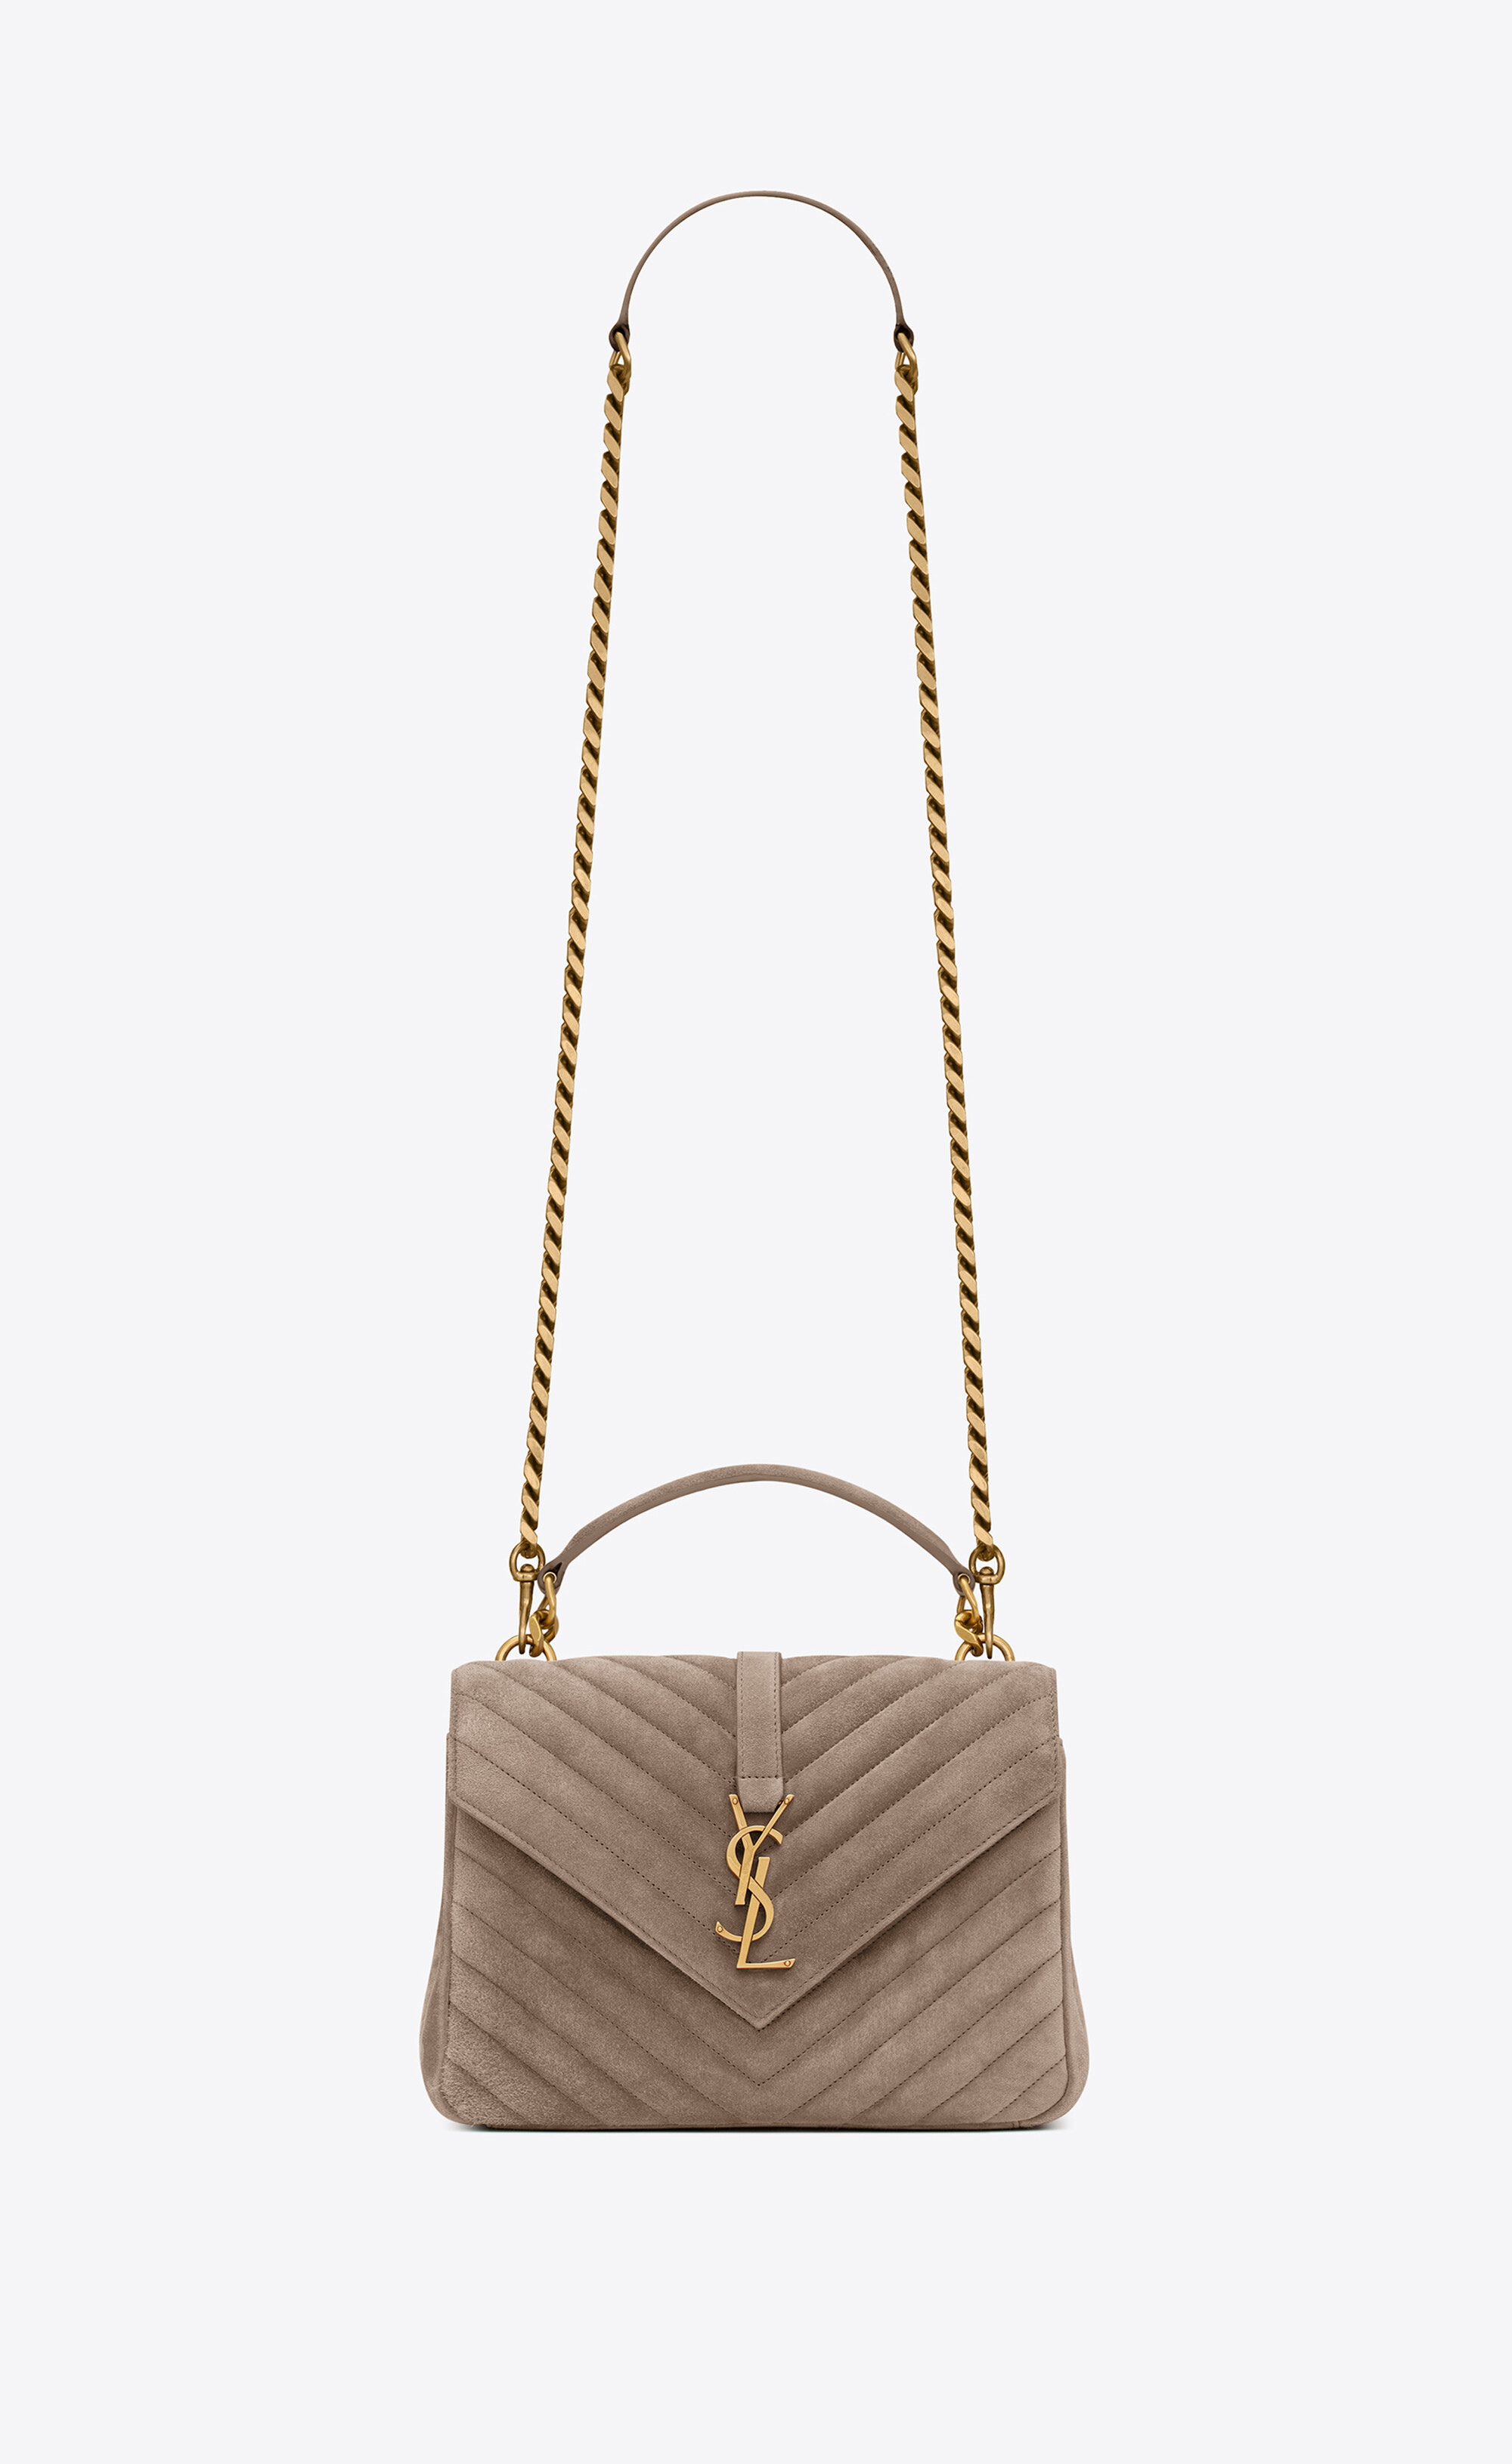 YSL College Medium Chain Bag In Light Suede With Fringes – ZAK BAGS ©️